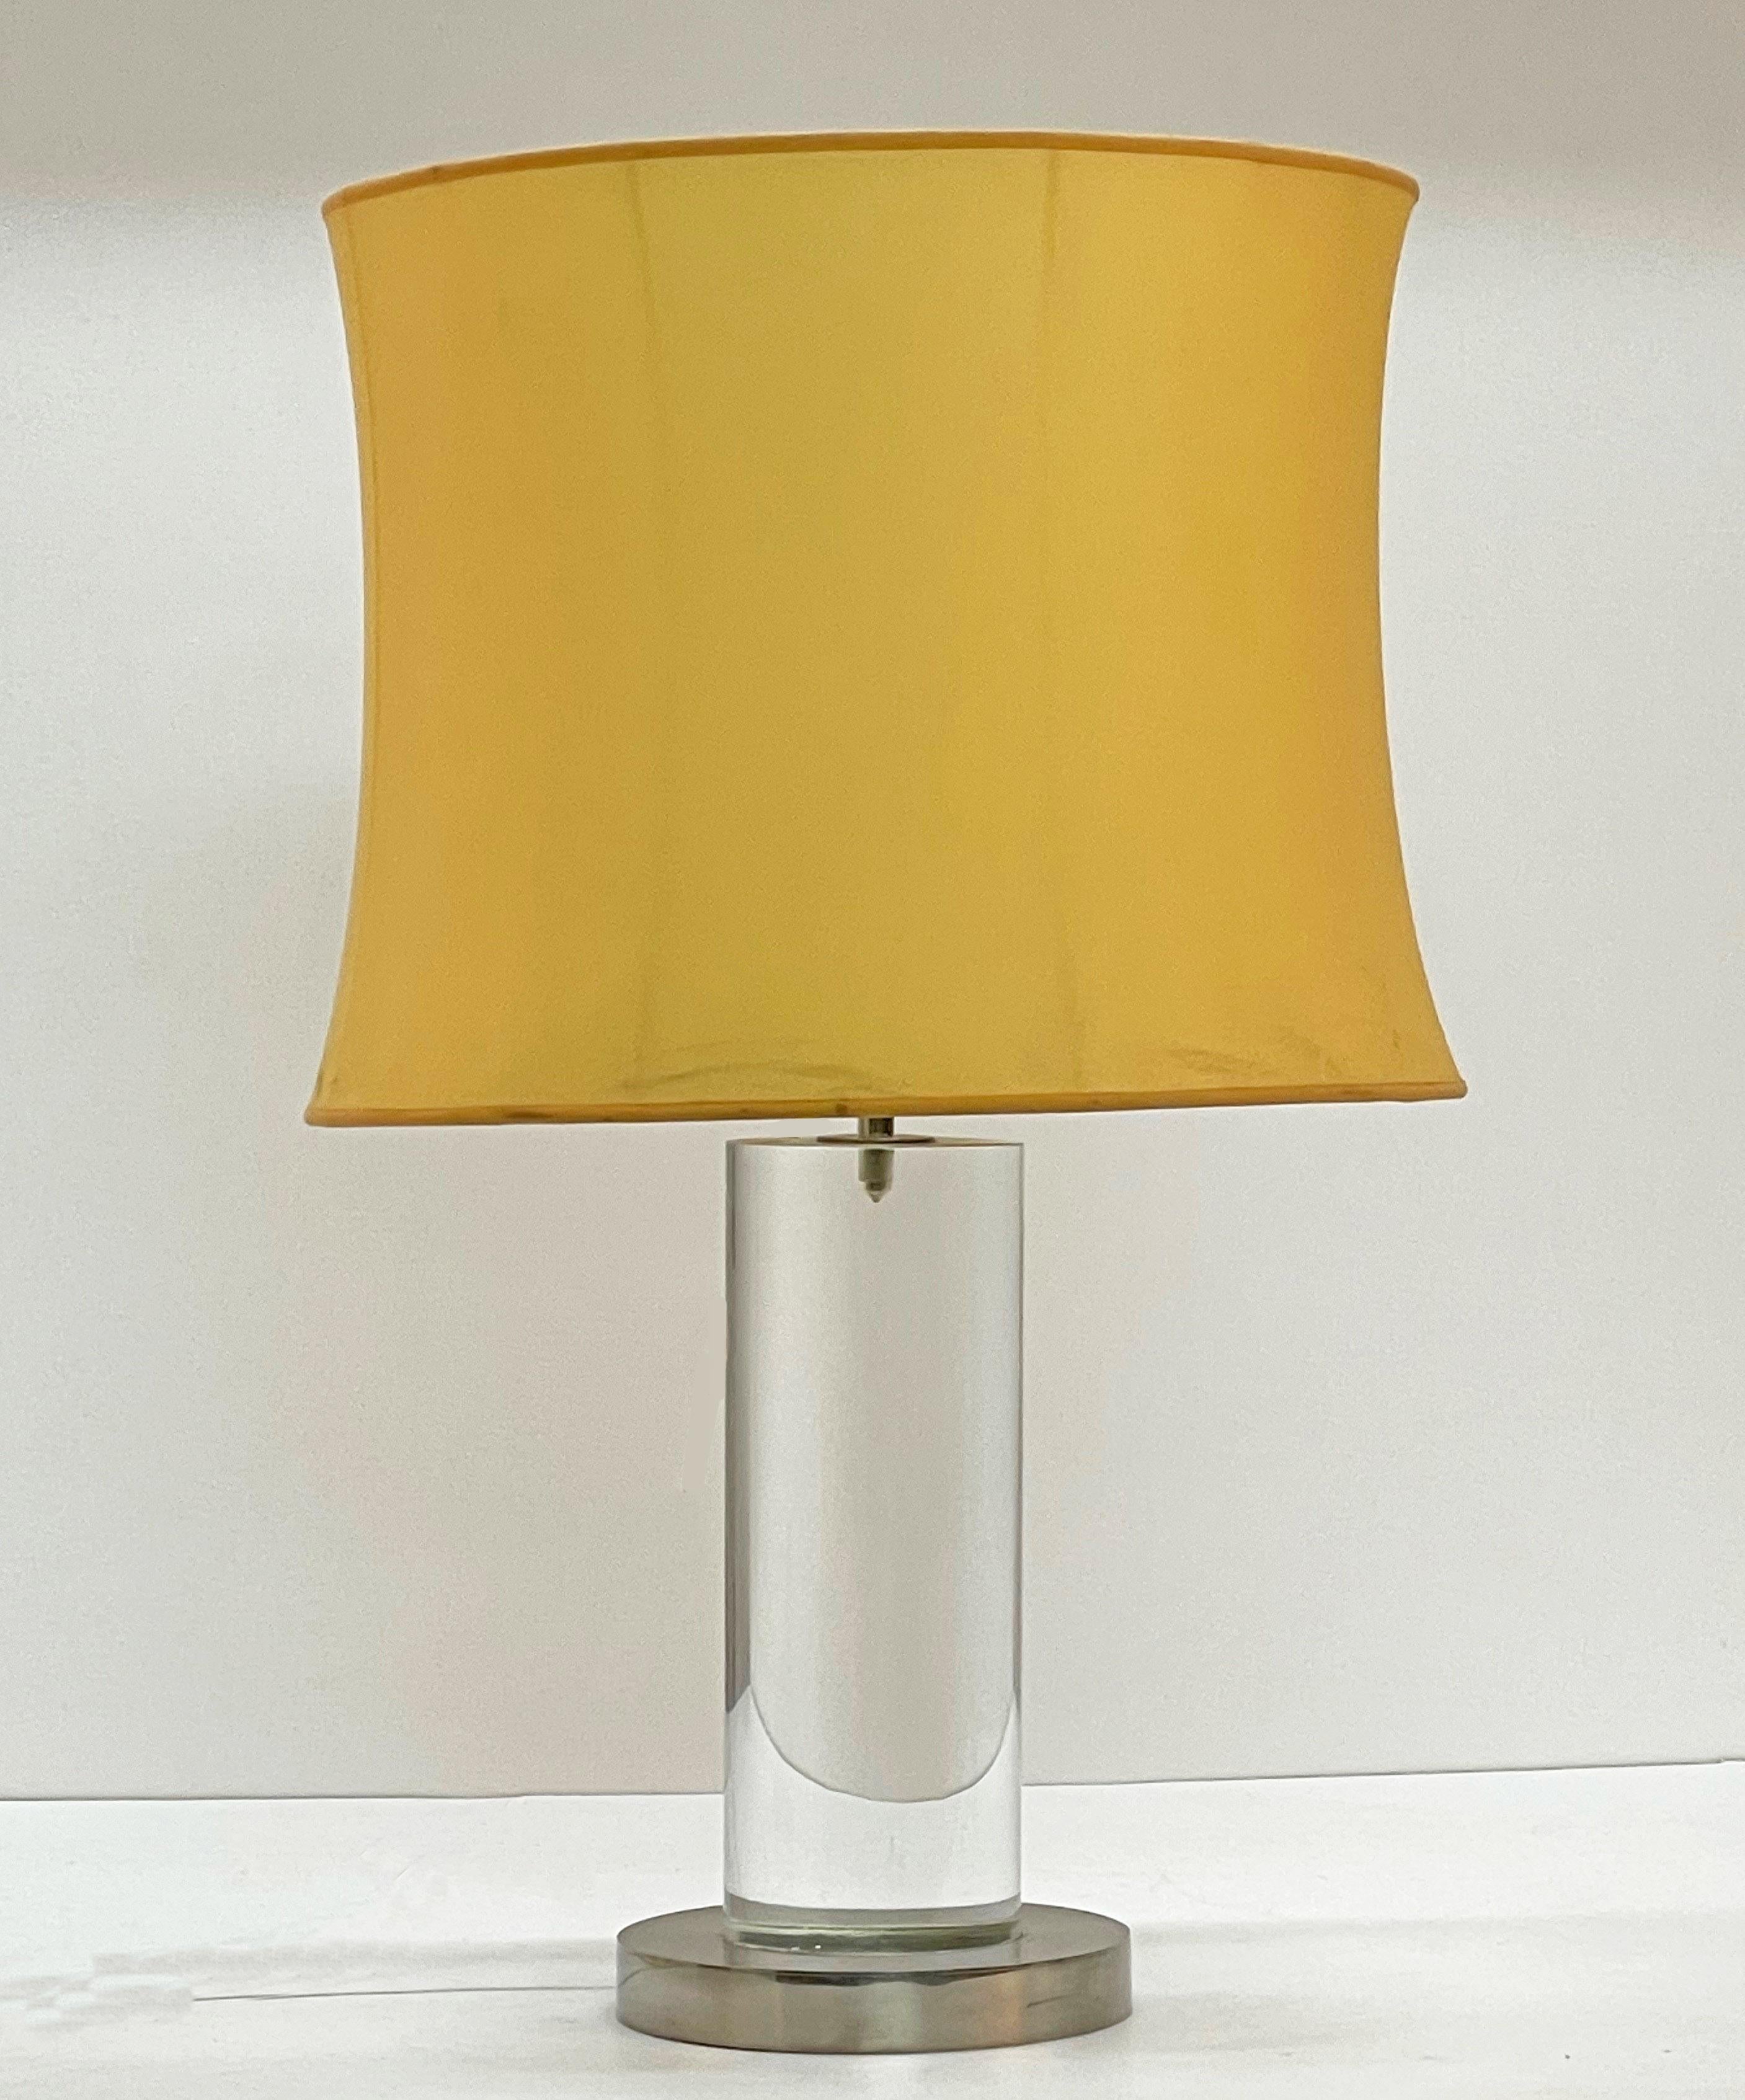 Romeo Rega Midcentury Italian Table Lamp with Lucite Column and Brass Base 1970s For Sale 8